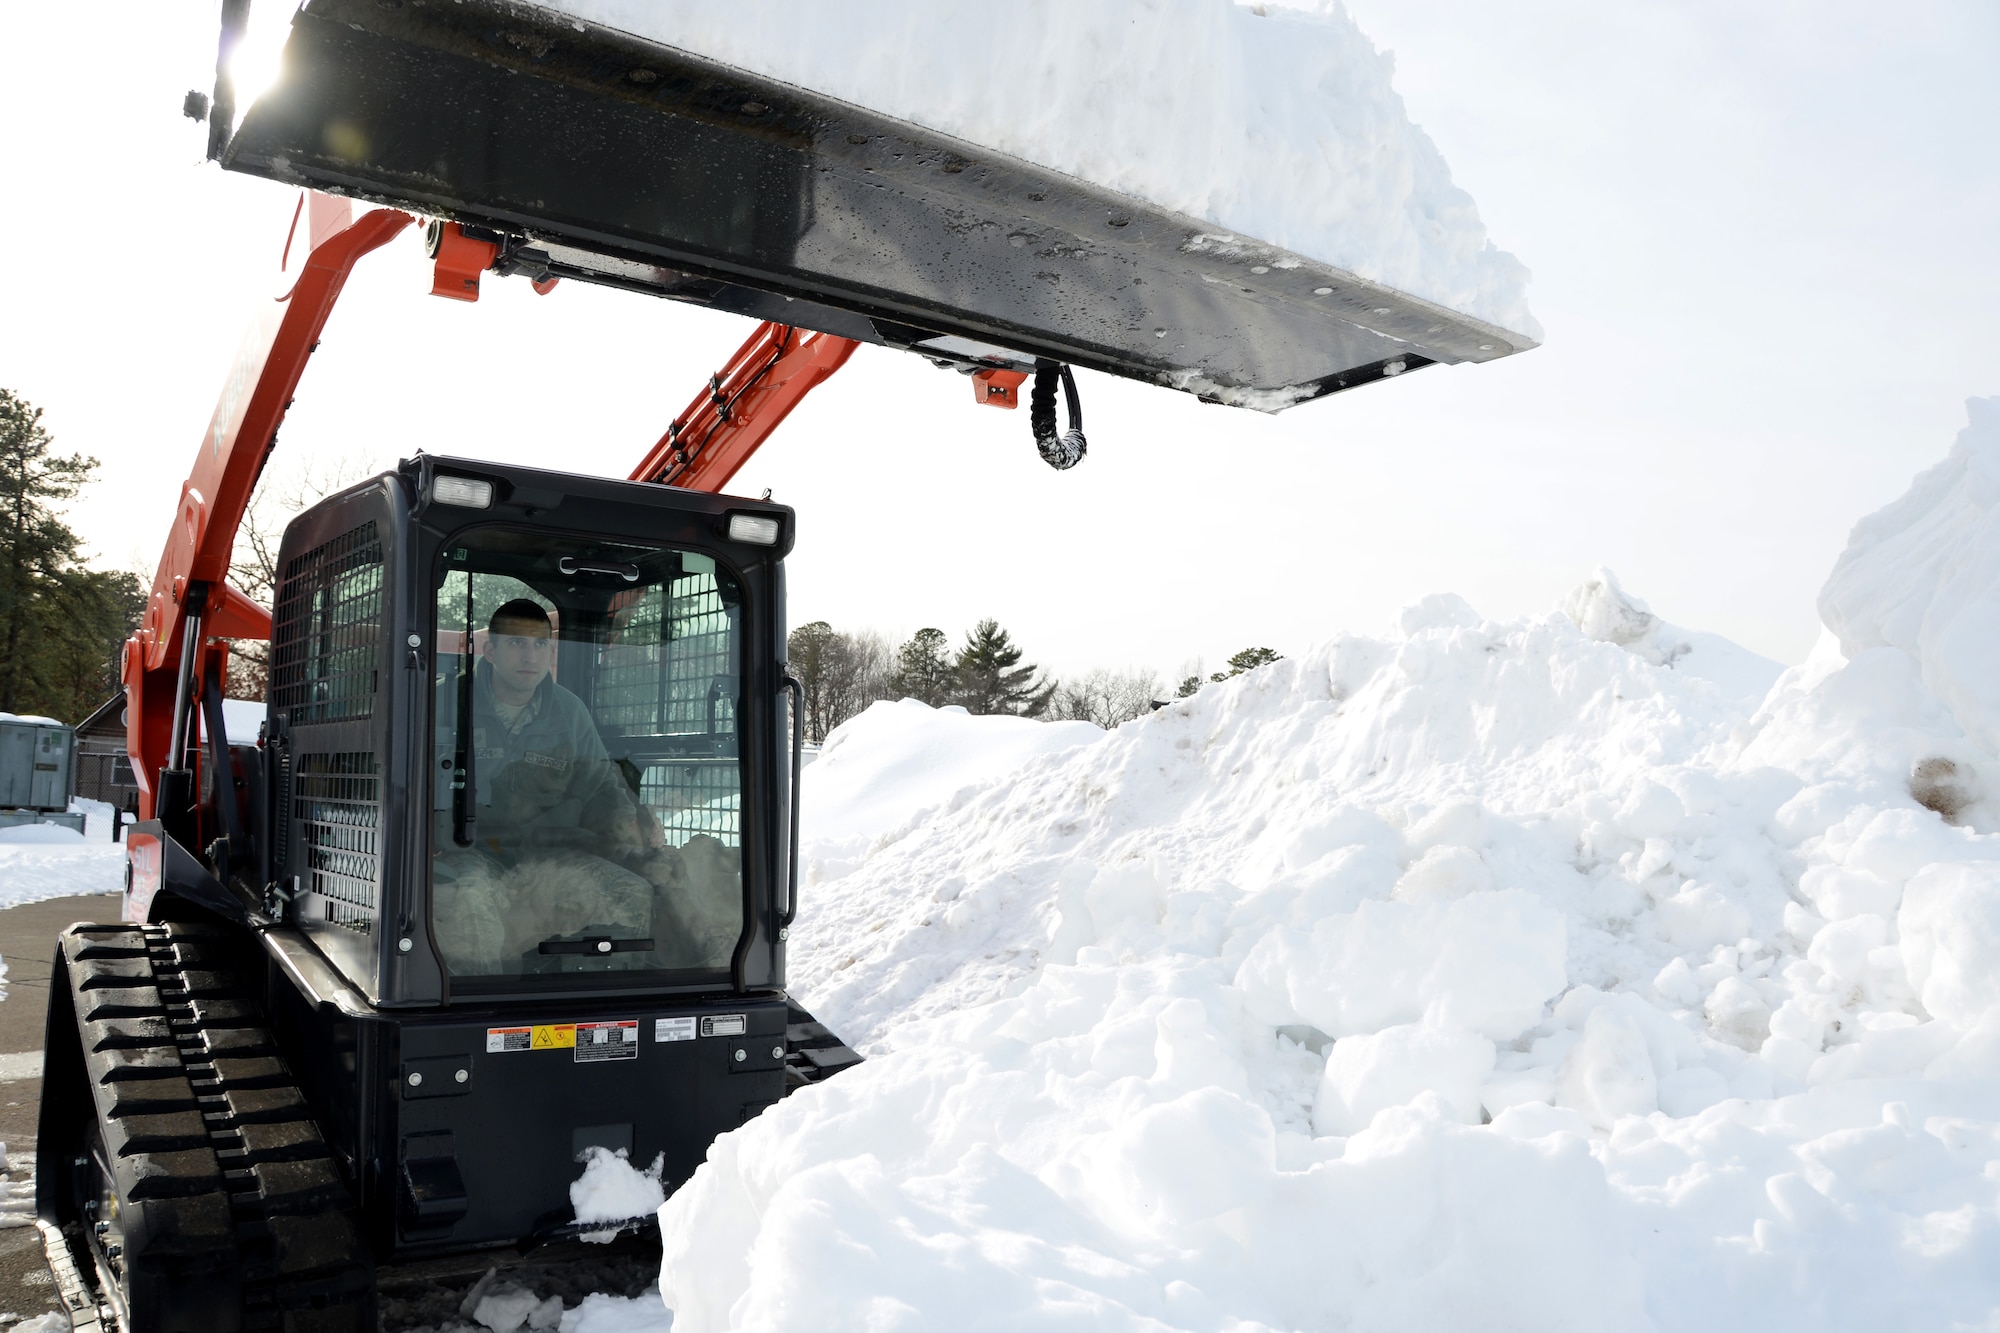 Senior Airman Christopher Cangemi, 103rd Civil Engineer Squadron, uses a new Kabota skid steer machine to clear snow from an accumulation point that could soon host additional snow expected to fall overnight on Feb. 12, 2014.  Despite their current high state of readiness and their proven track record of storm recovery service to the state and community, the unit will soon conduct a three-day course to train additional volunteers from other units of the Connecticut Air National Guard to increase the available pool of skilled team members for recovery operations in the event of a natural disaster, on or off base.  (U.S. Air National Guard photo by Master Sgt. Erin McNamara)